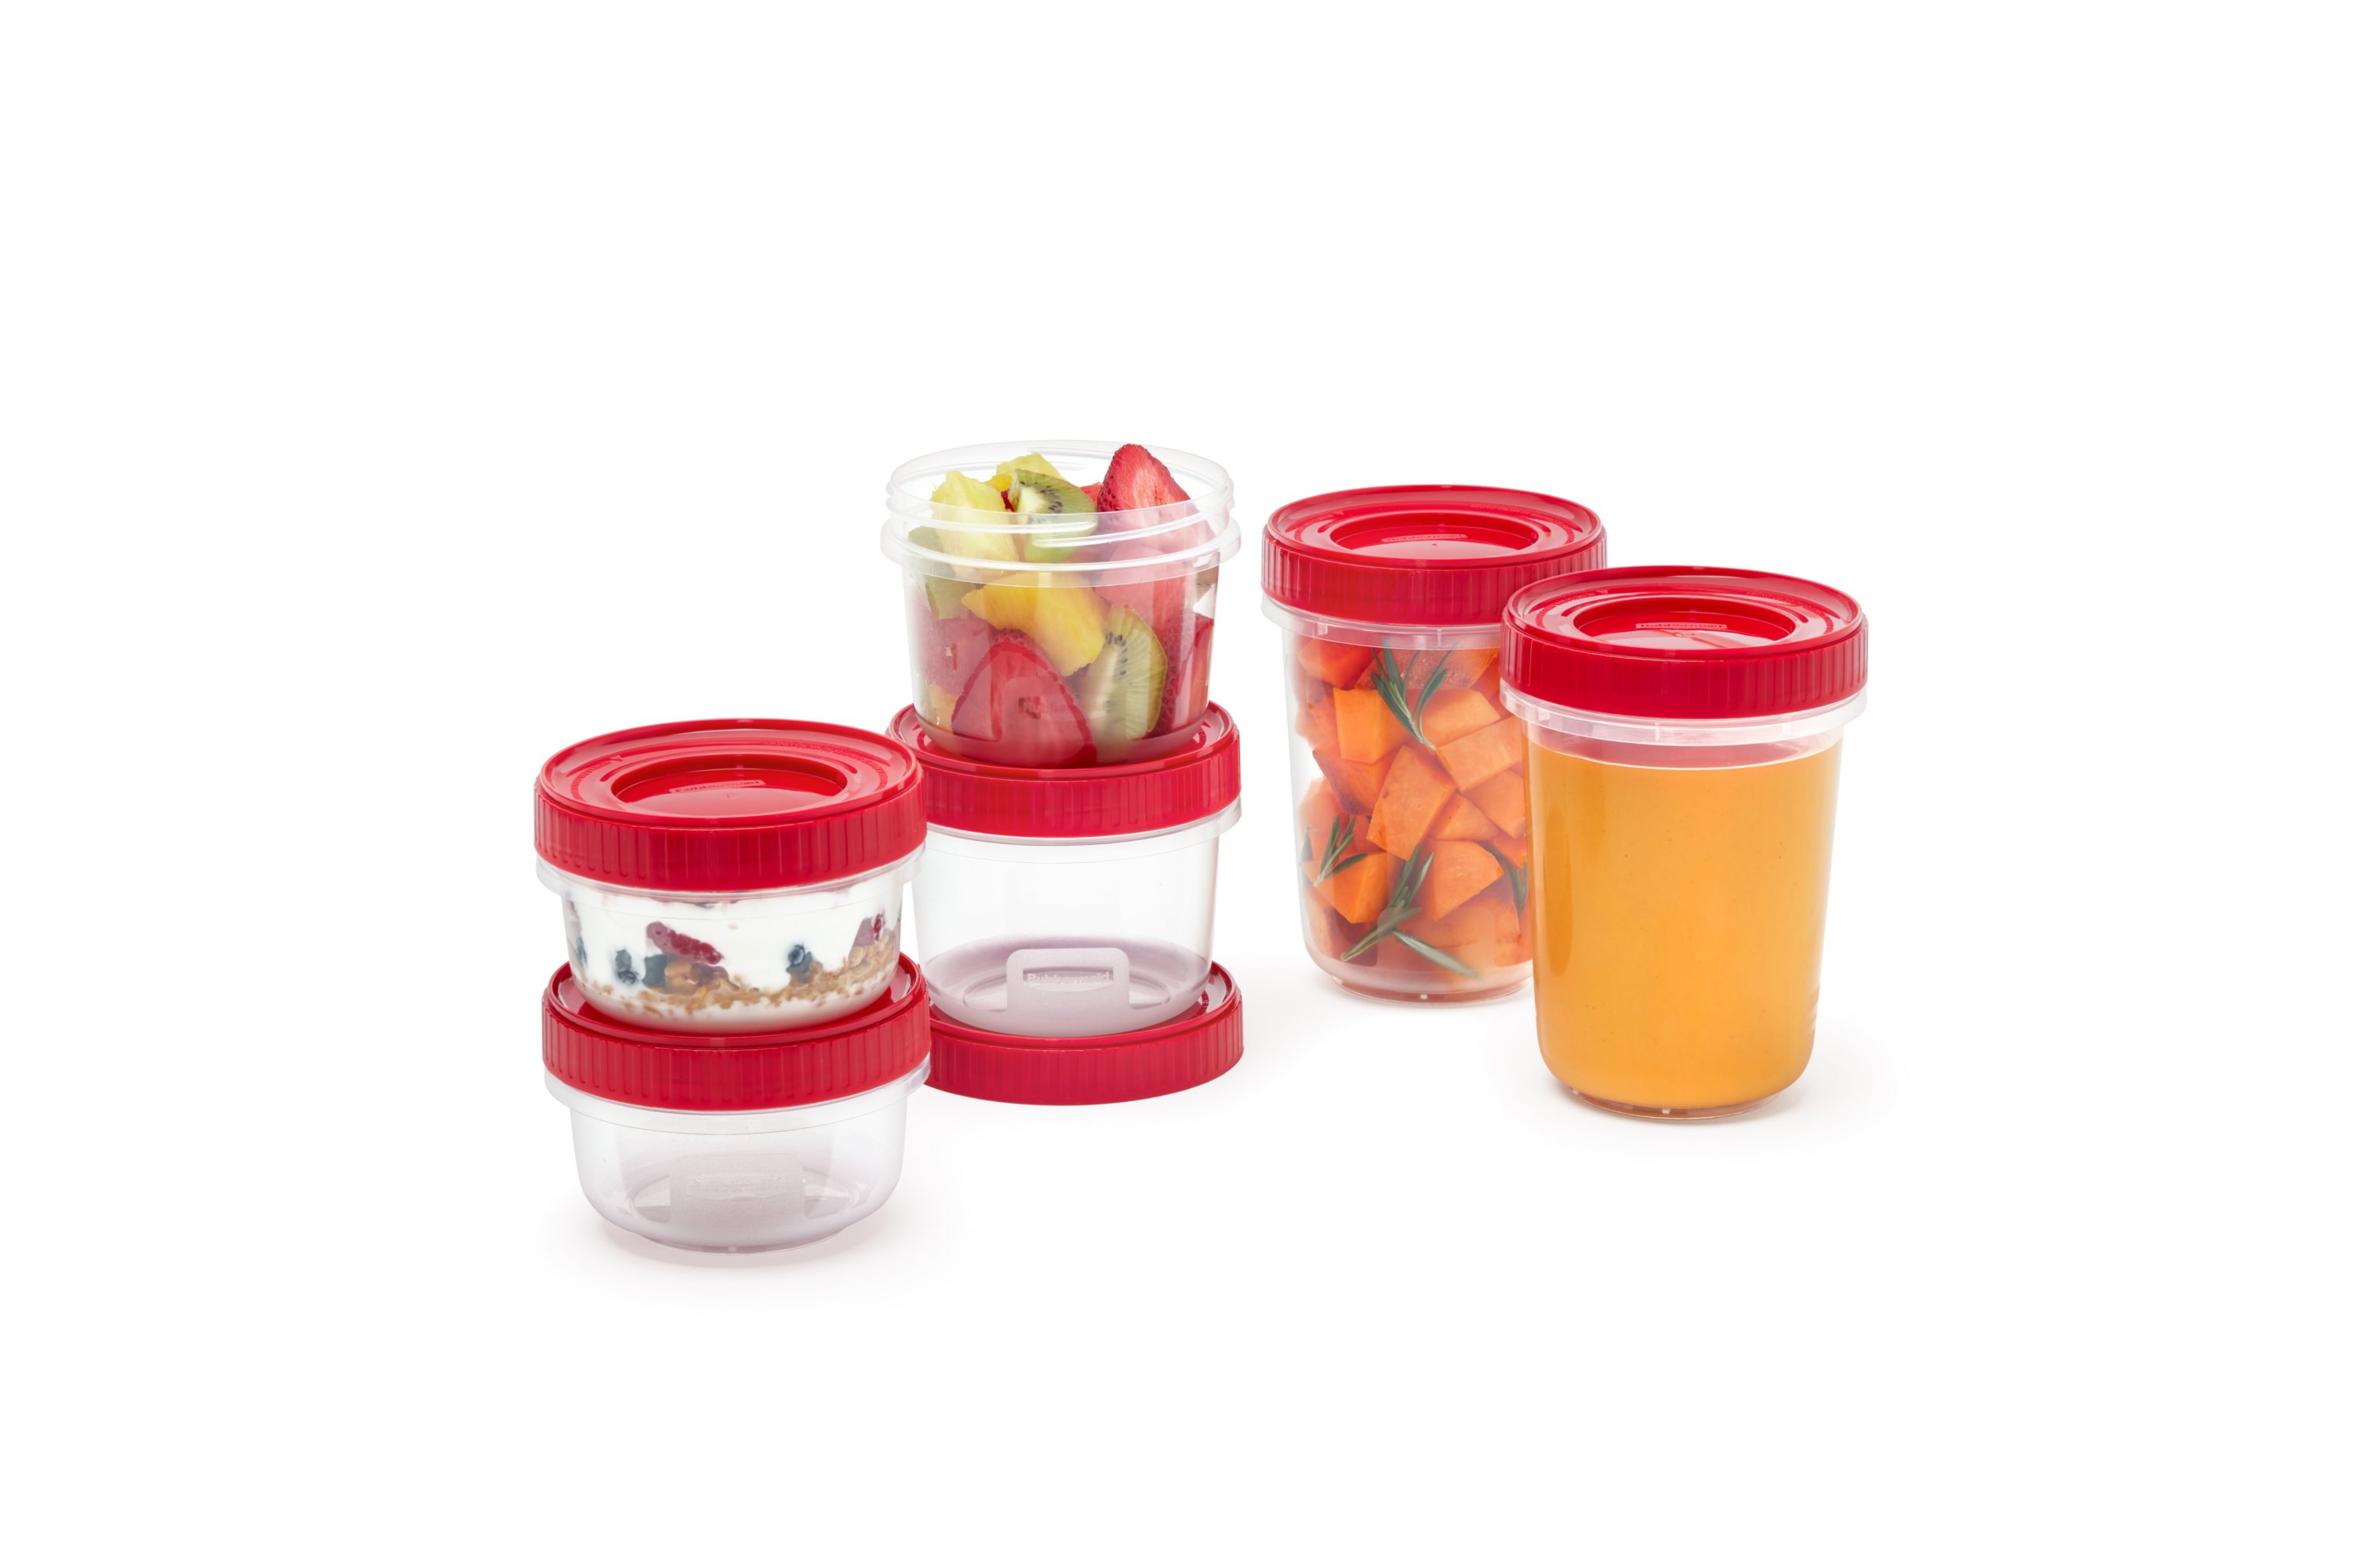 Rubbermaid Take Alongs Twist & Seal Containers & Lids